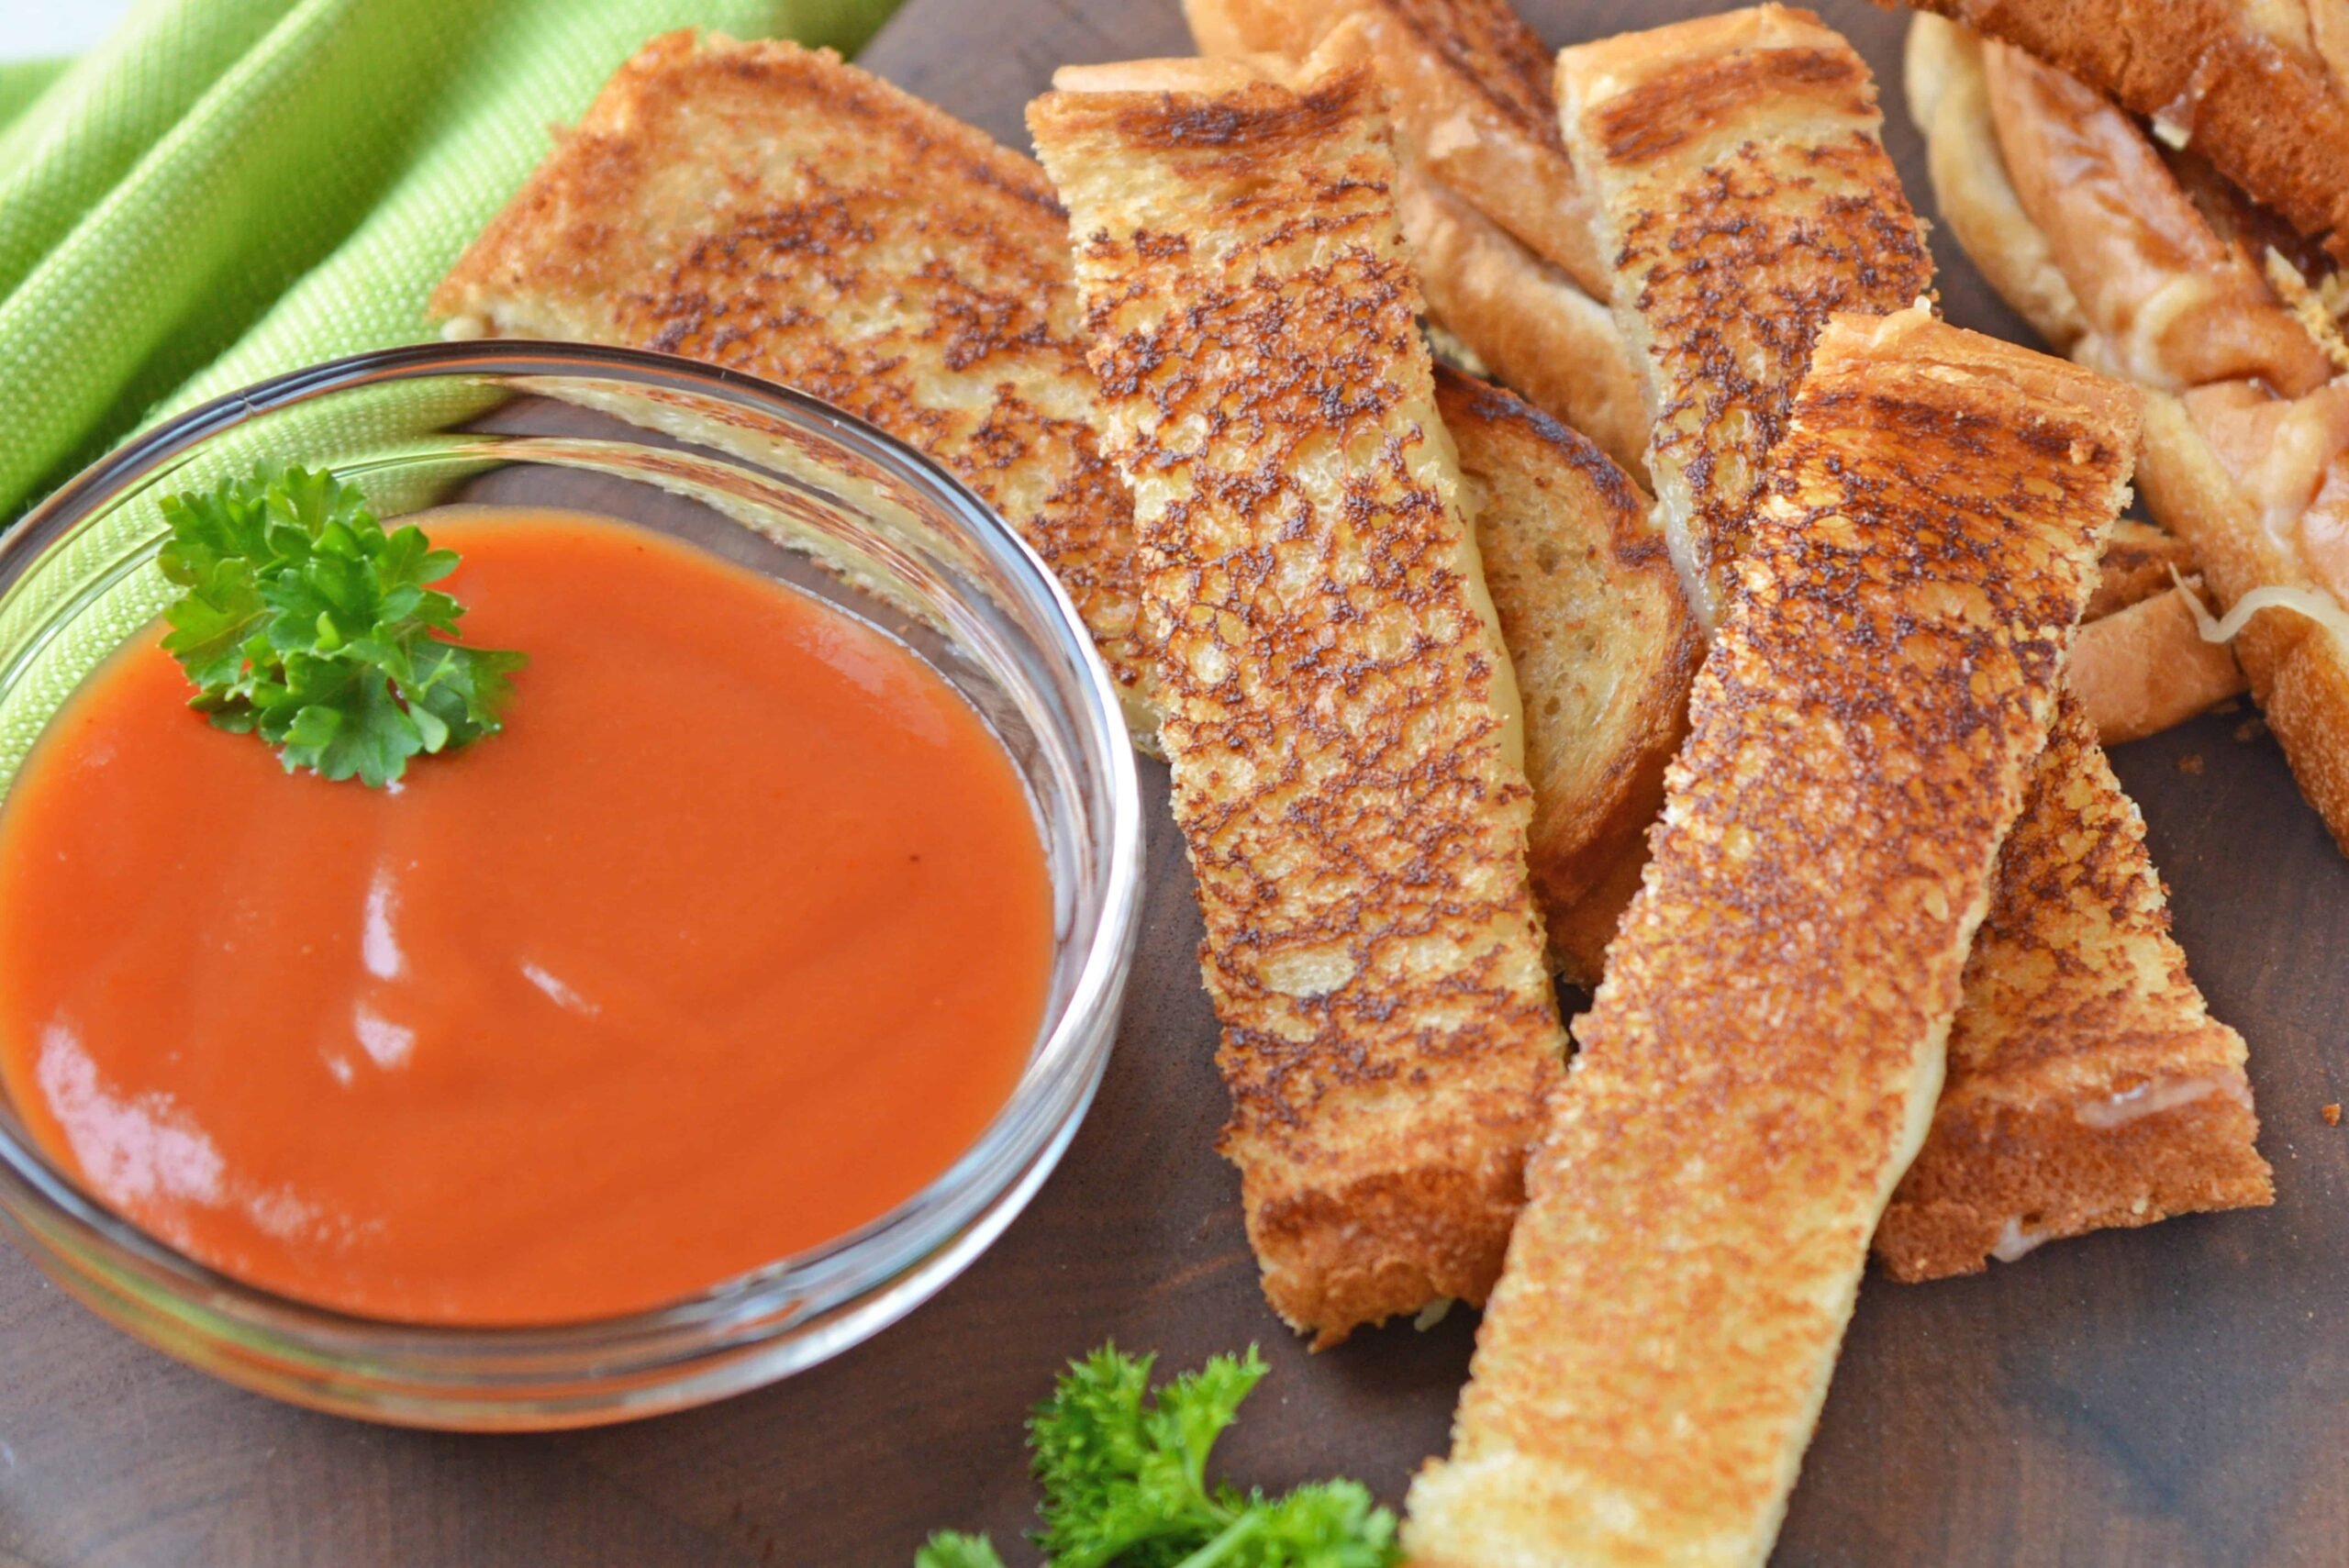 https://www.savoryexperiments.com/wp-content/uploads/2015/04/Grilled-Cheese-Sticks-11-scaled.jpg